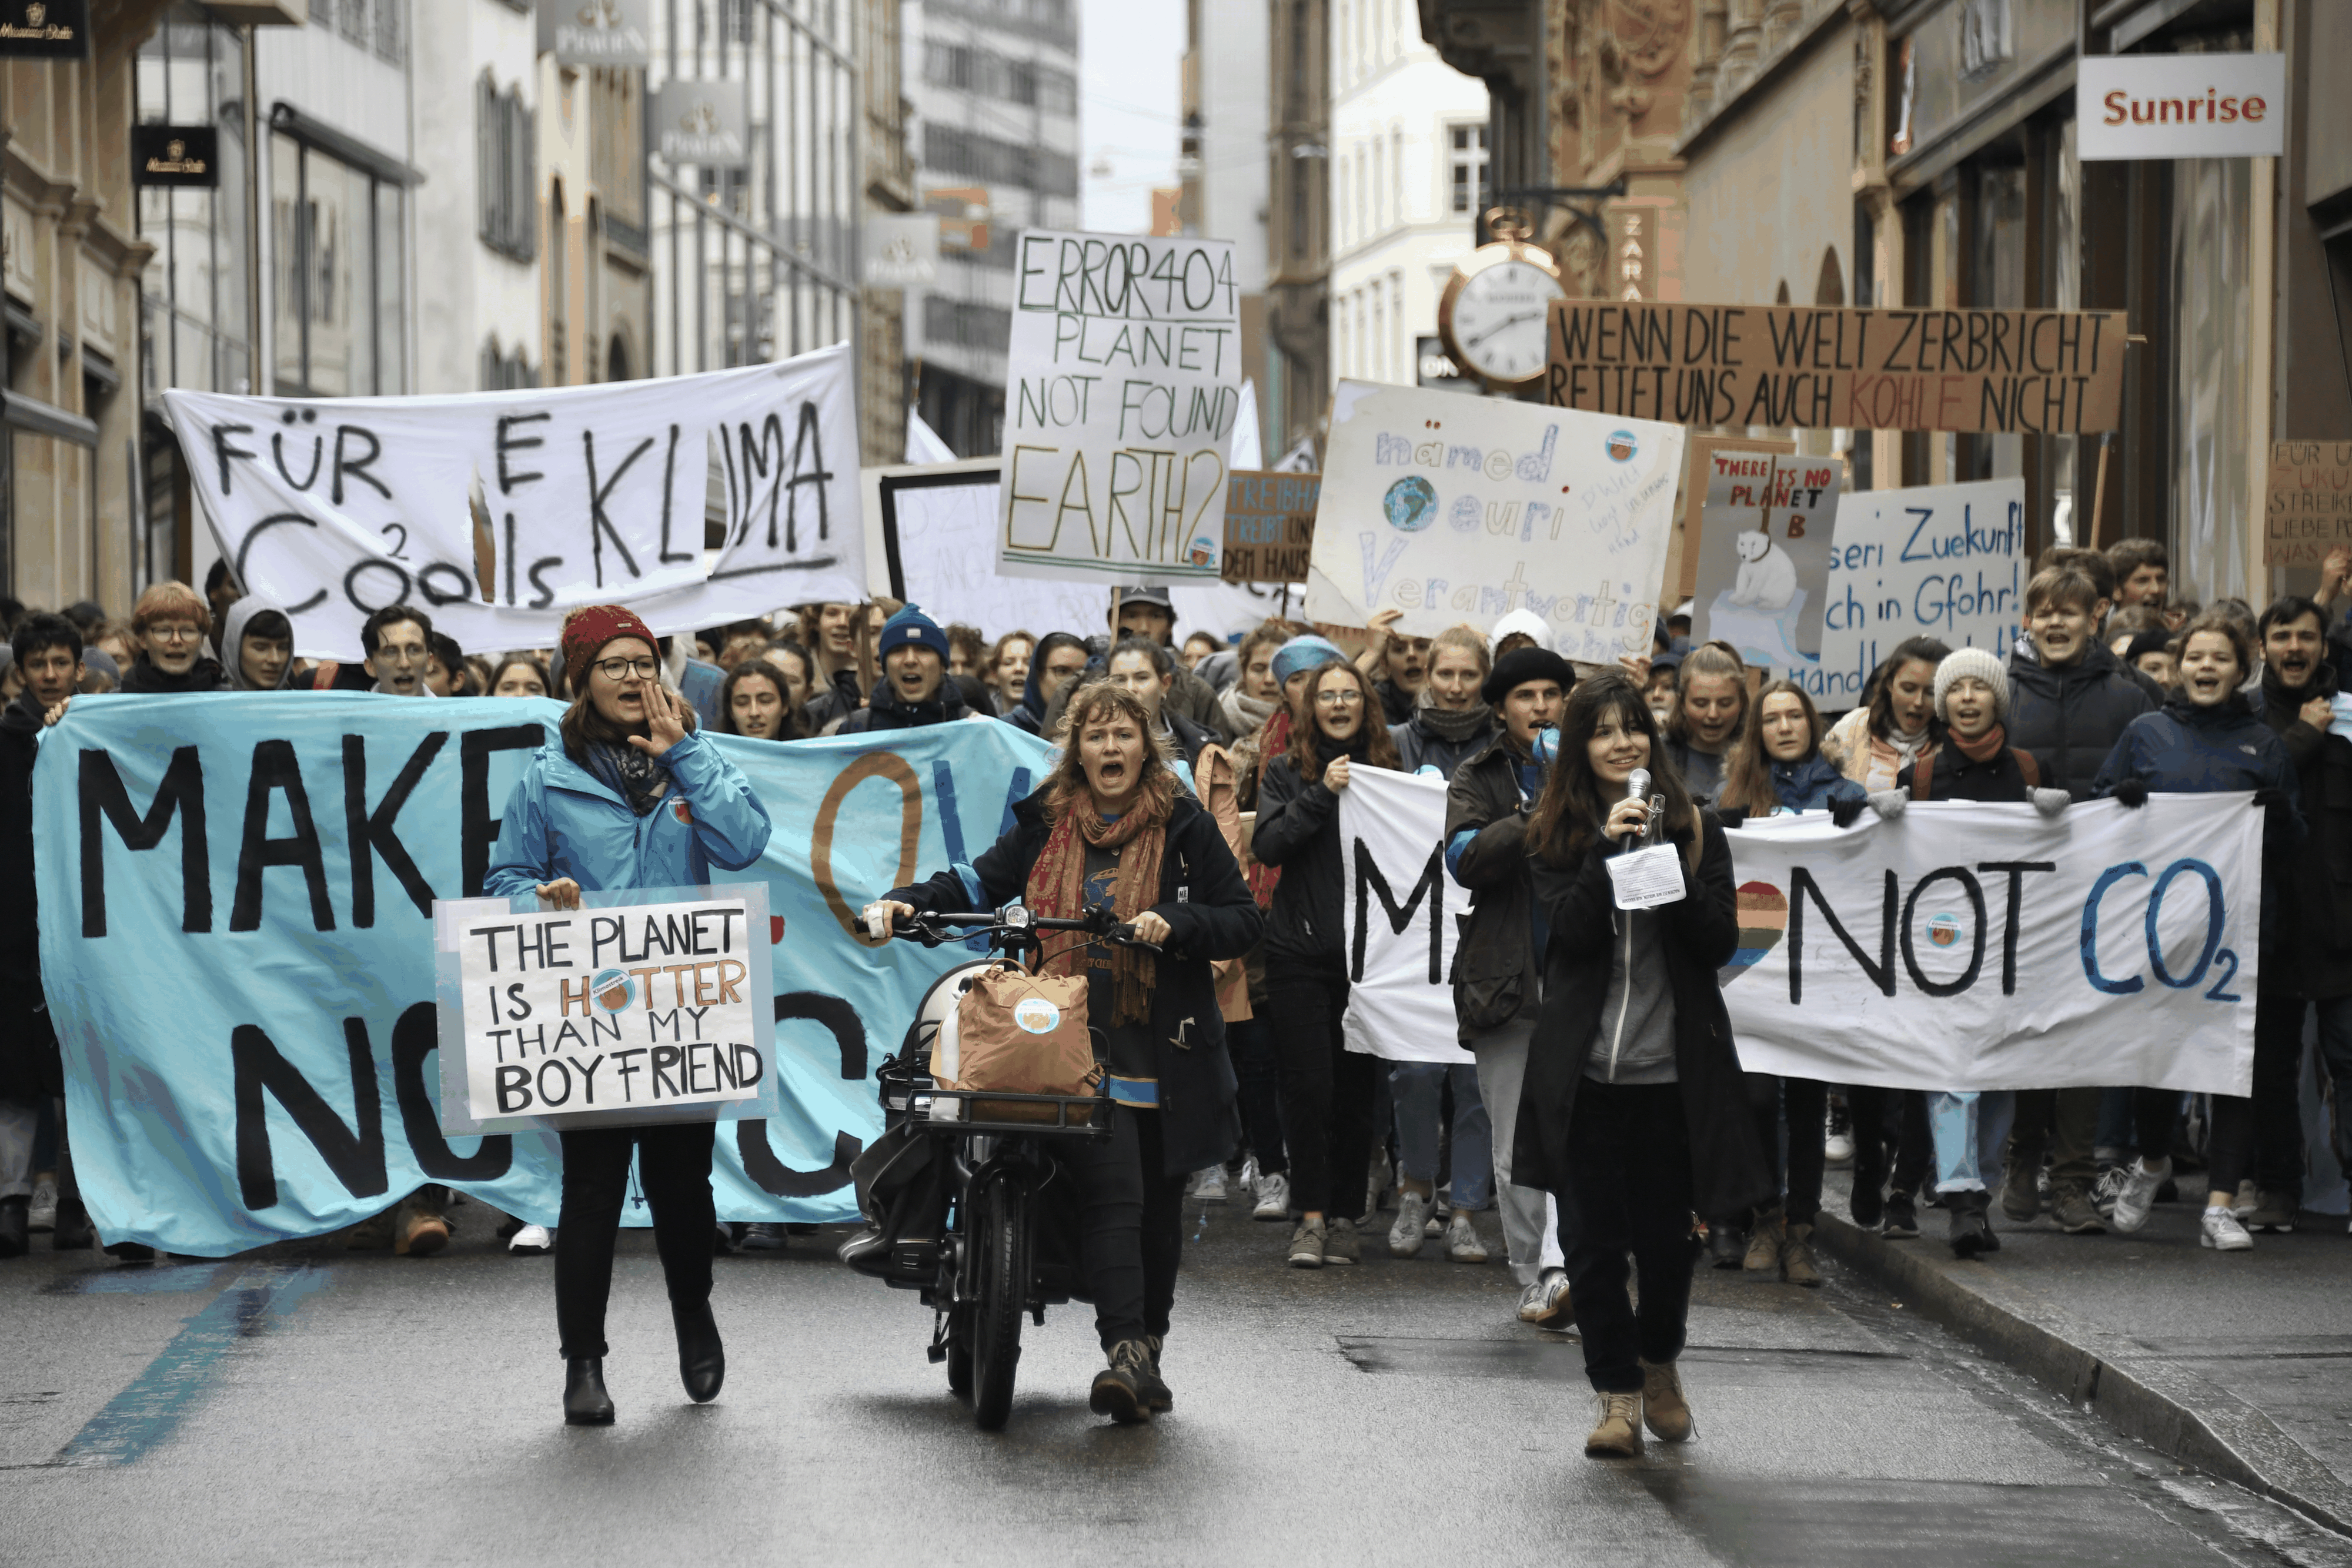 People demonstrate during a &quot;Climate strike&quot; demonstration to protest a lack of climate awareness, in Basel, Switzerland, Friday, March 1, 2019. (KEYSTONE/Georgios Kefalas)